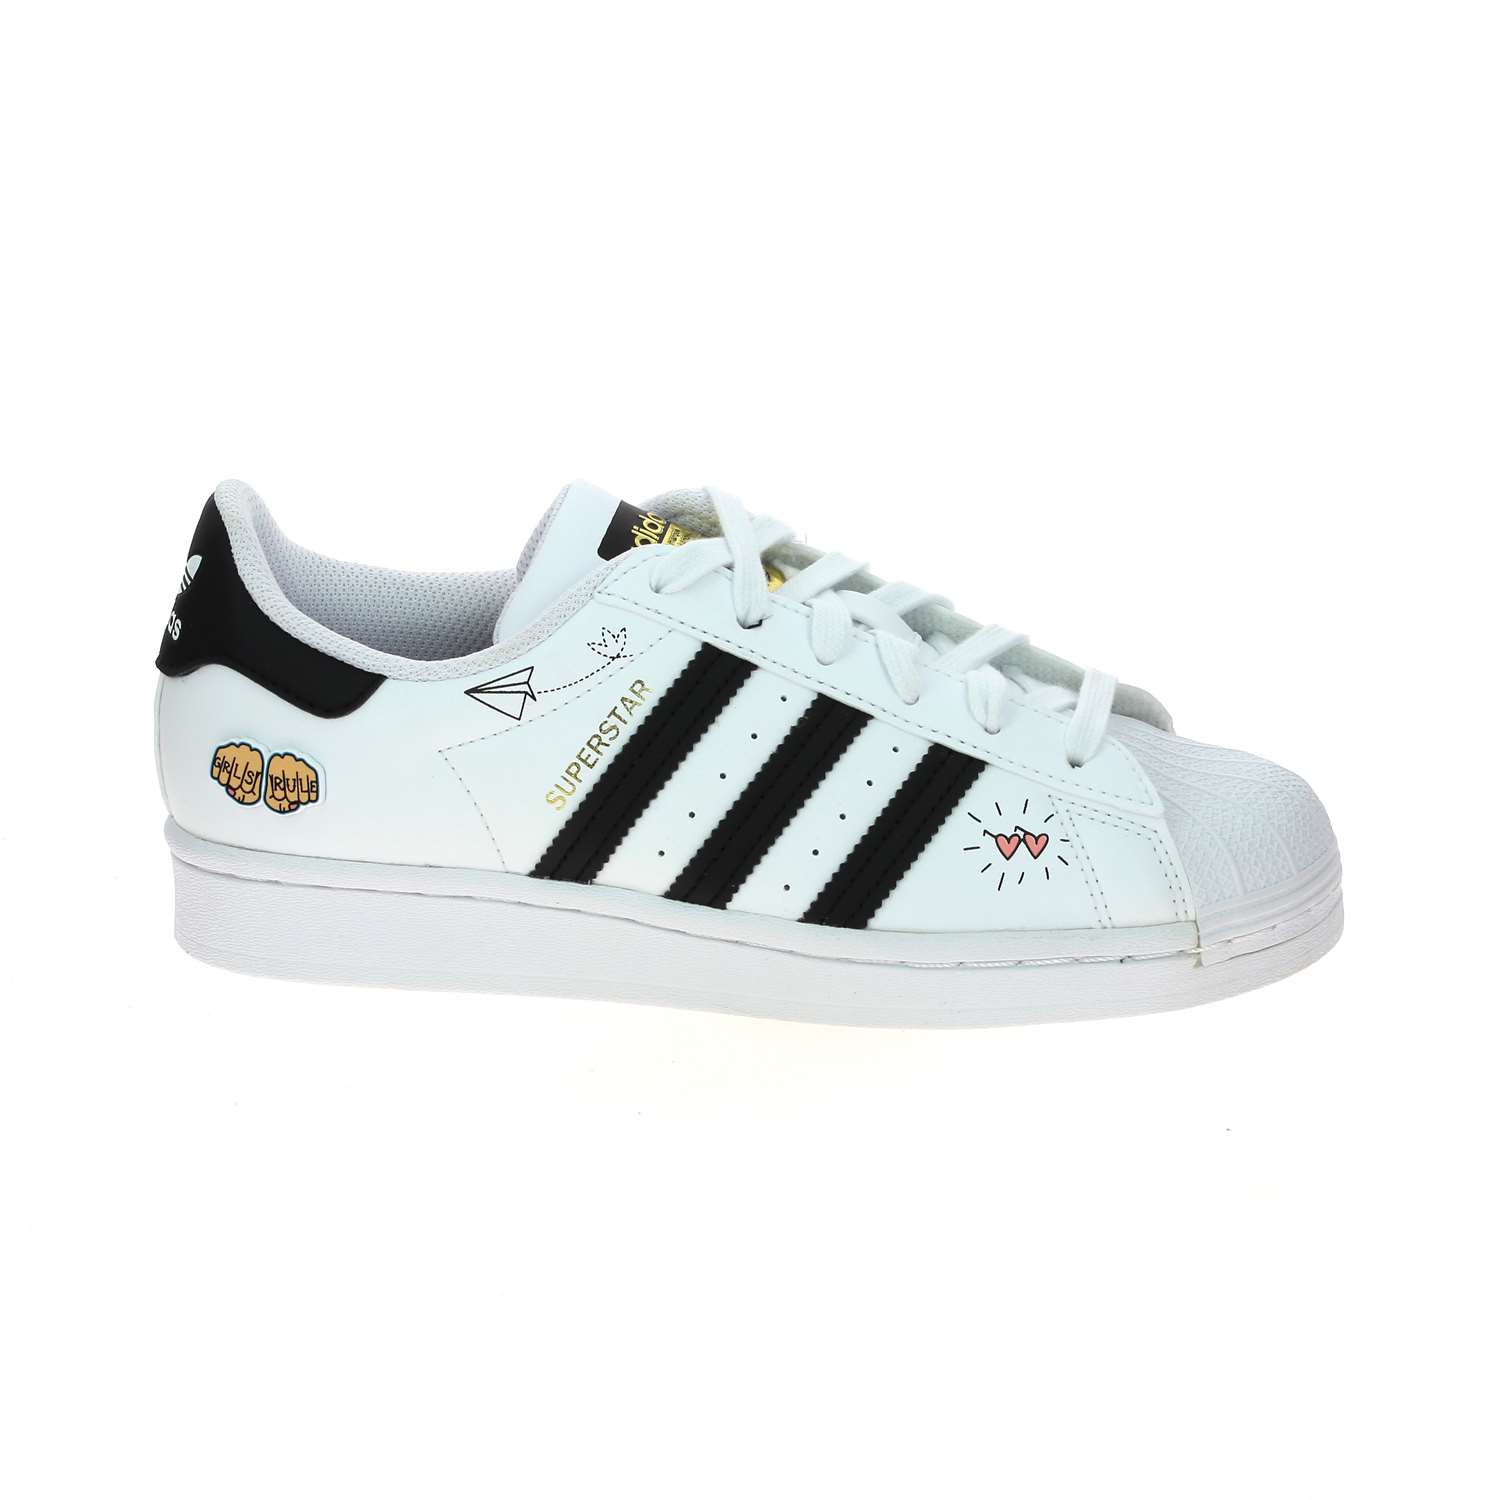 02 - SUPERSTAR COOL - ADIDAS - Baskets - Synthétique